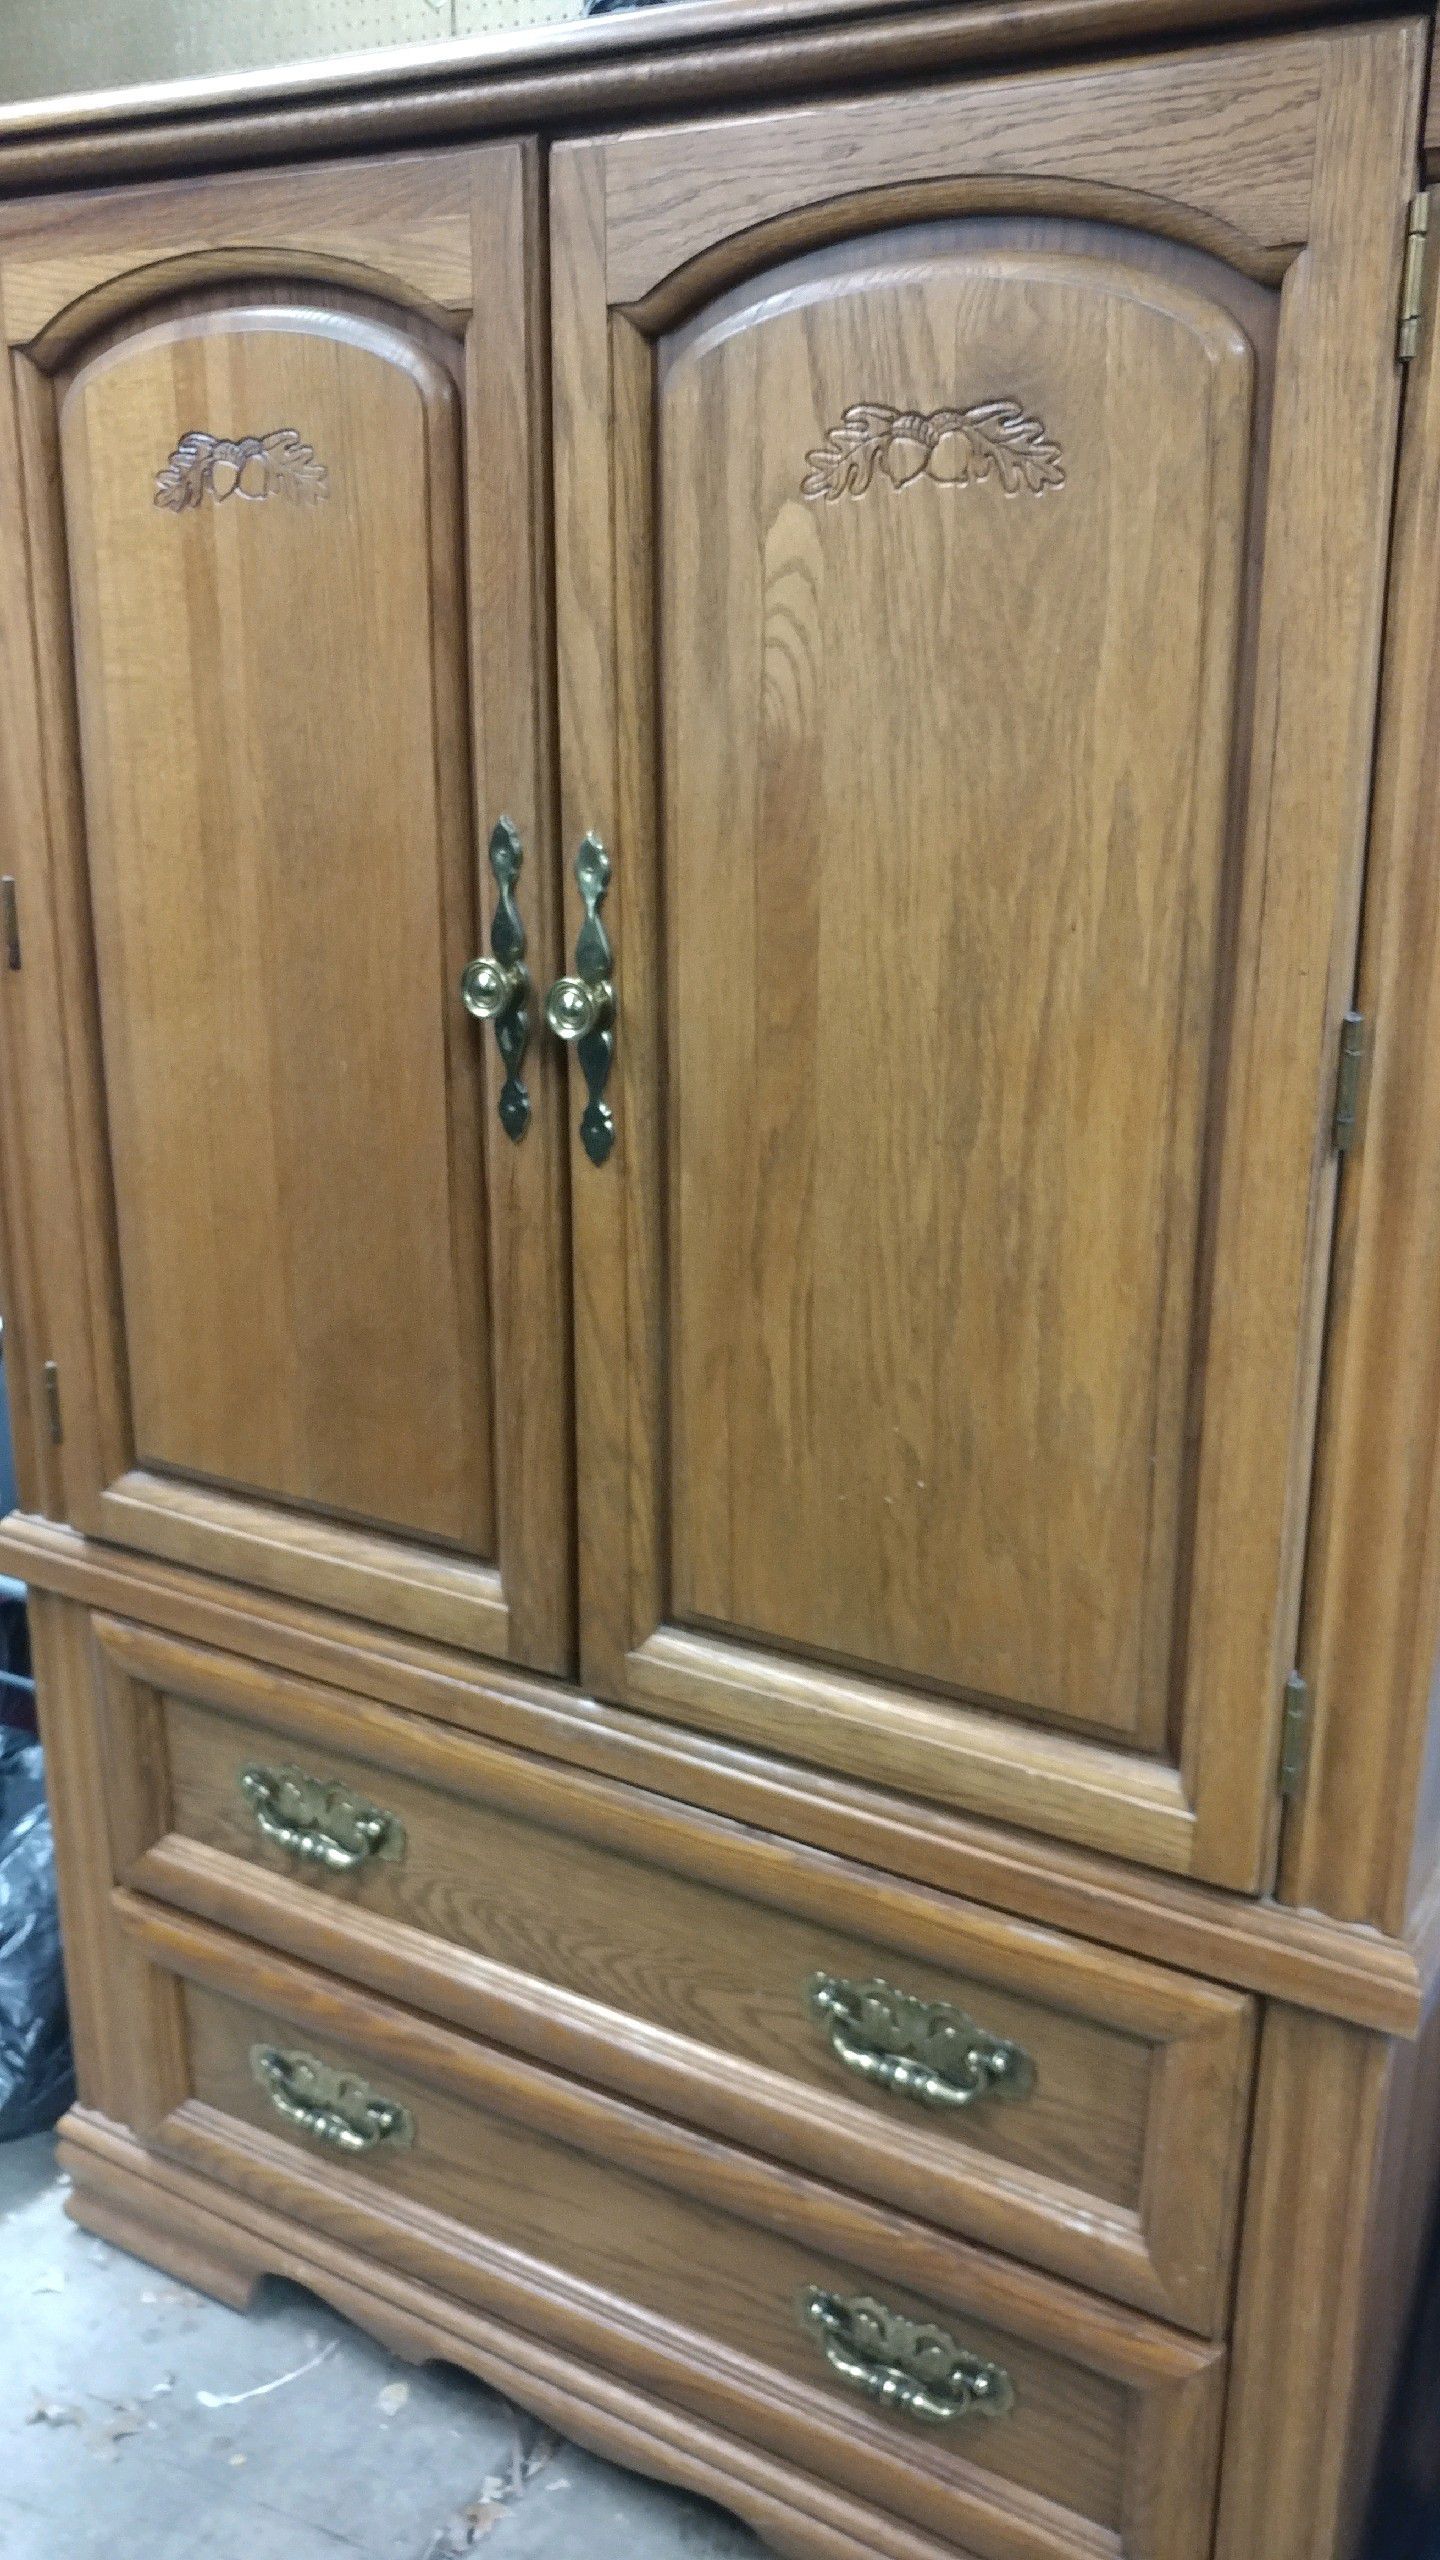 Oak Armoire for TV or storage